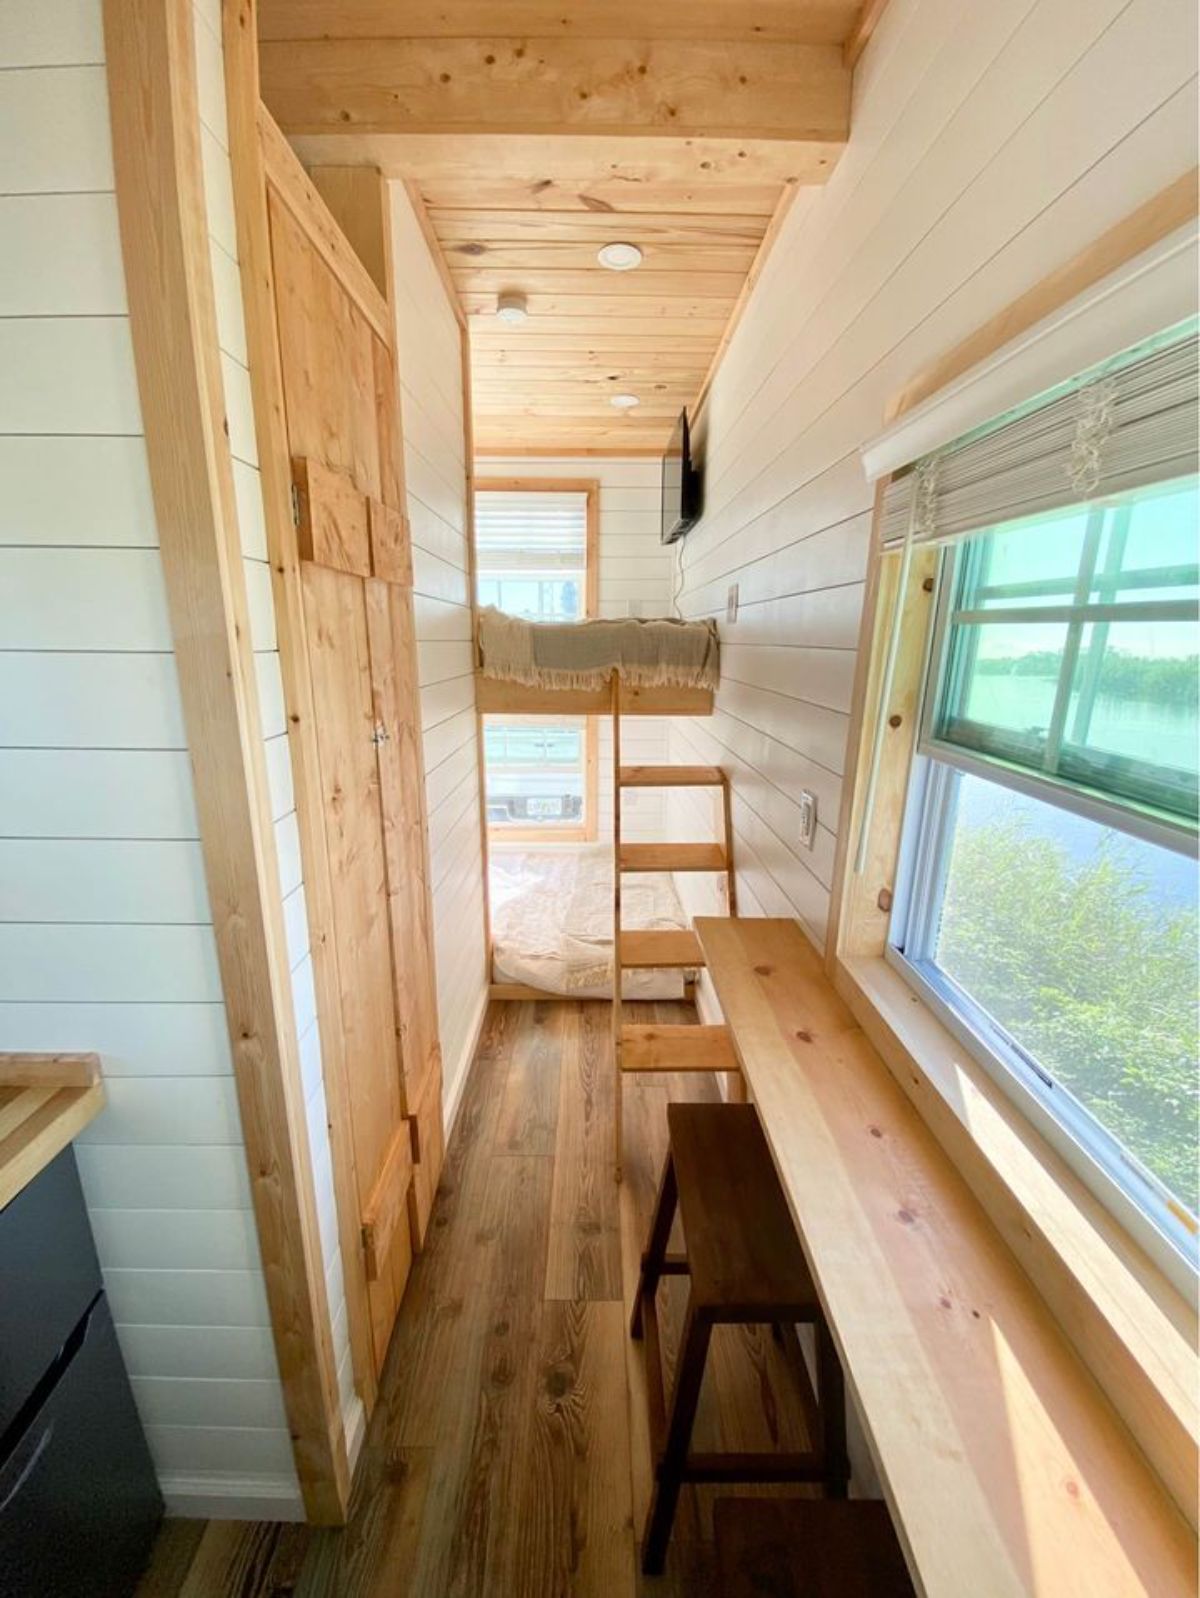 Long view of 14' Tiny Camper on Wheels from inside